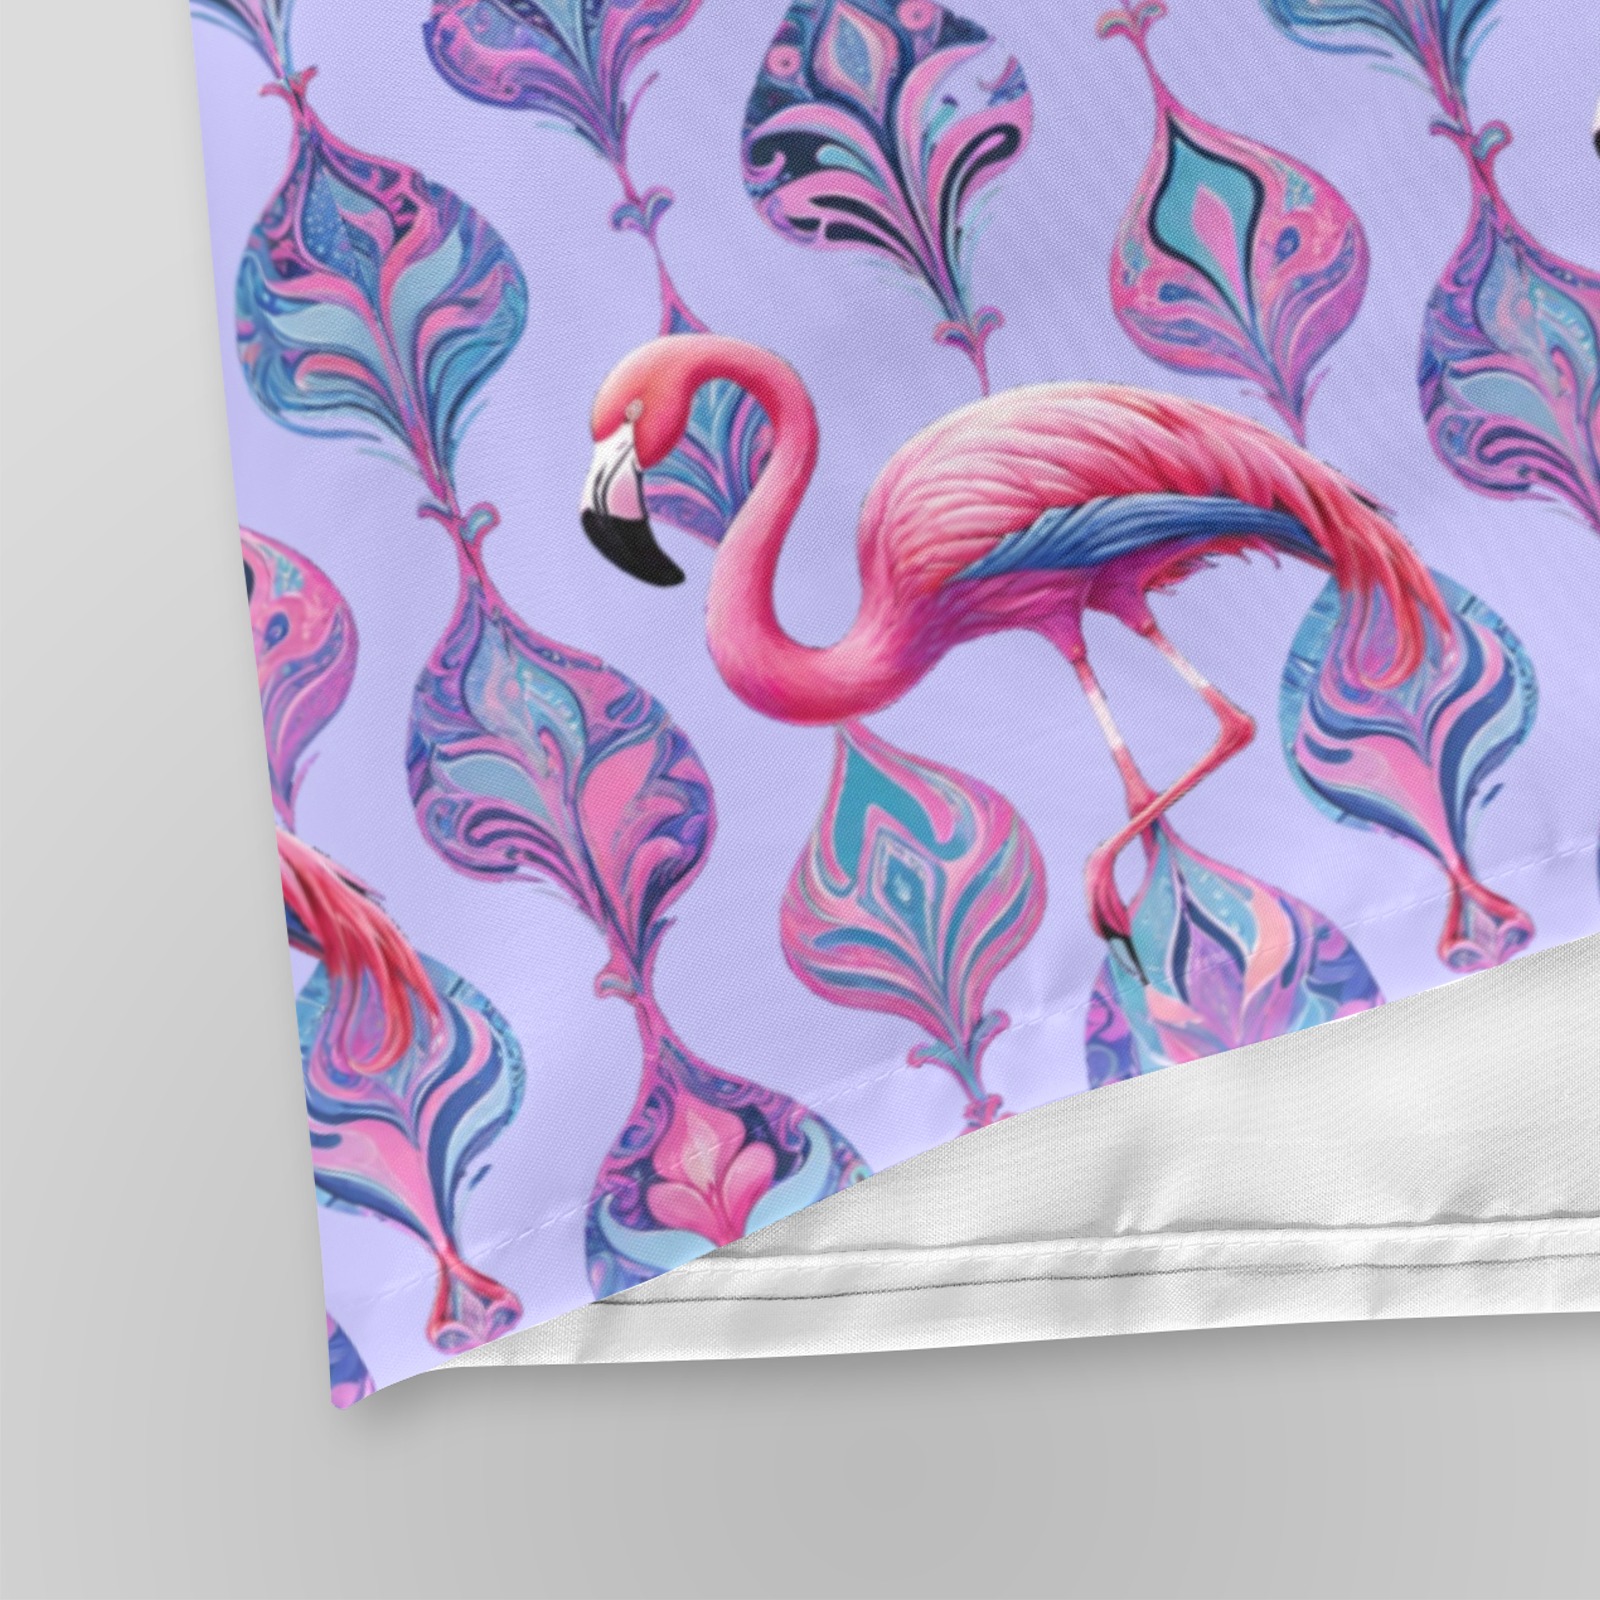 Flamingos Paisley Pattern Pastel Pink and Blue Shower Curtain 72" x 72"